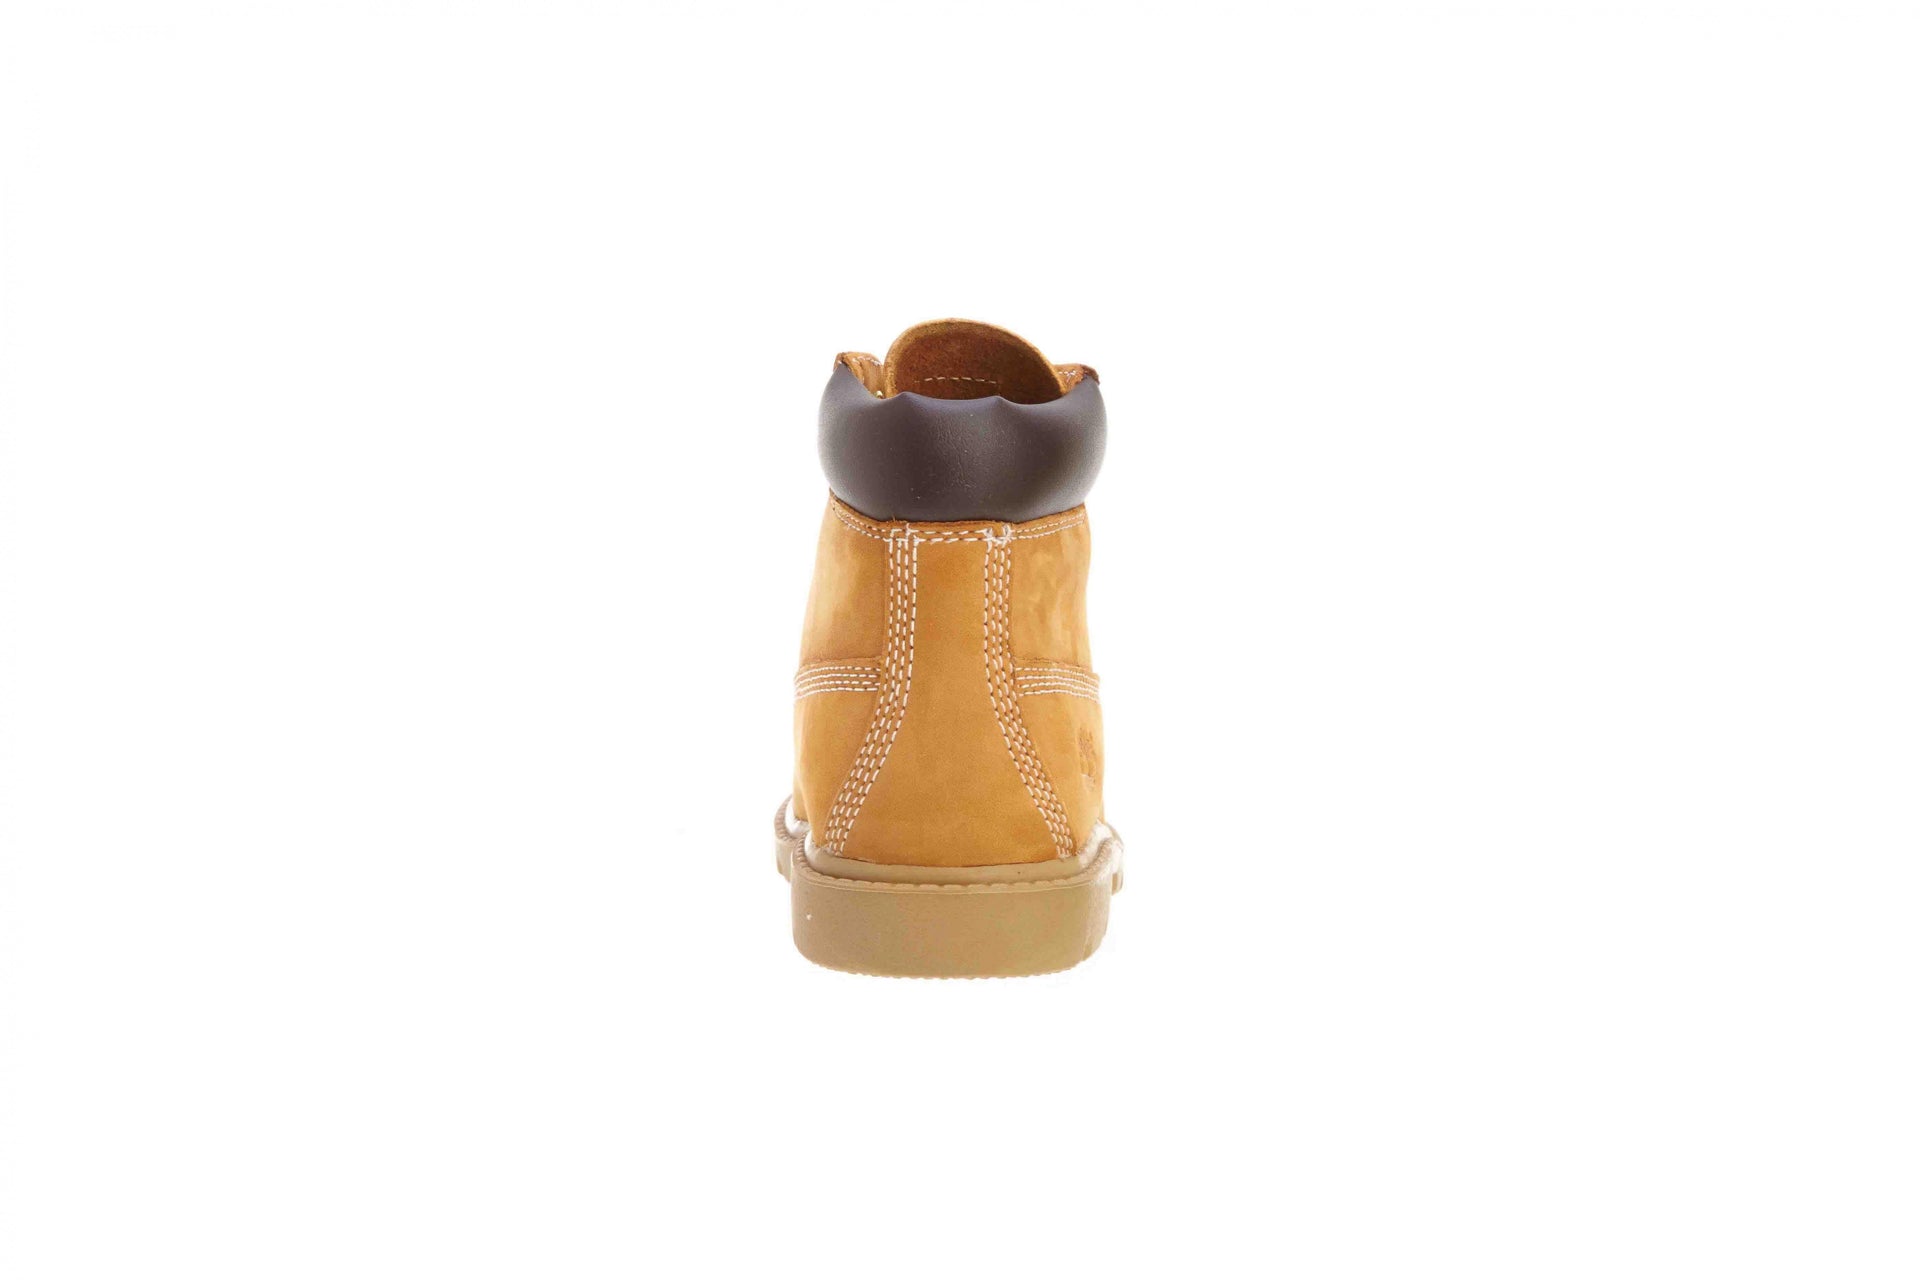 Timberland 6 IN BOOT Toddlers Style # 10860